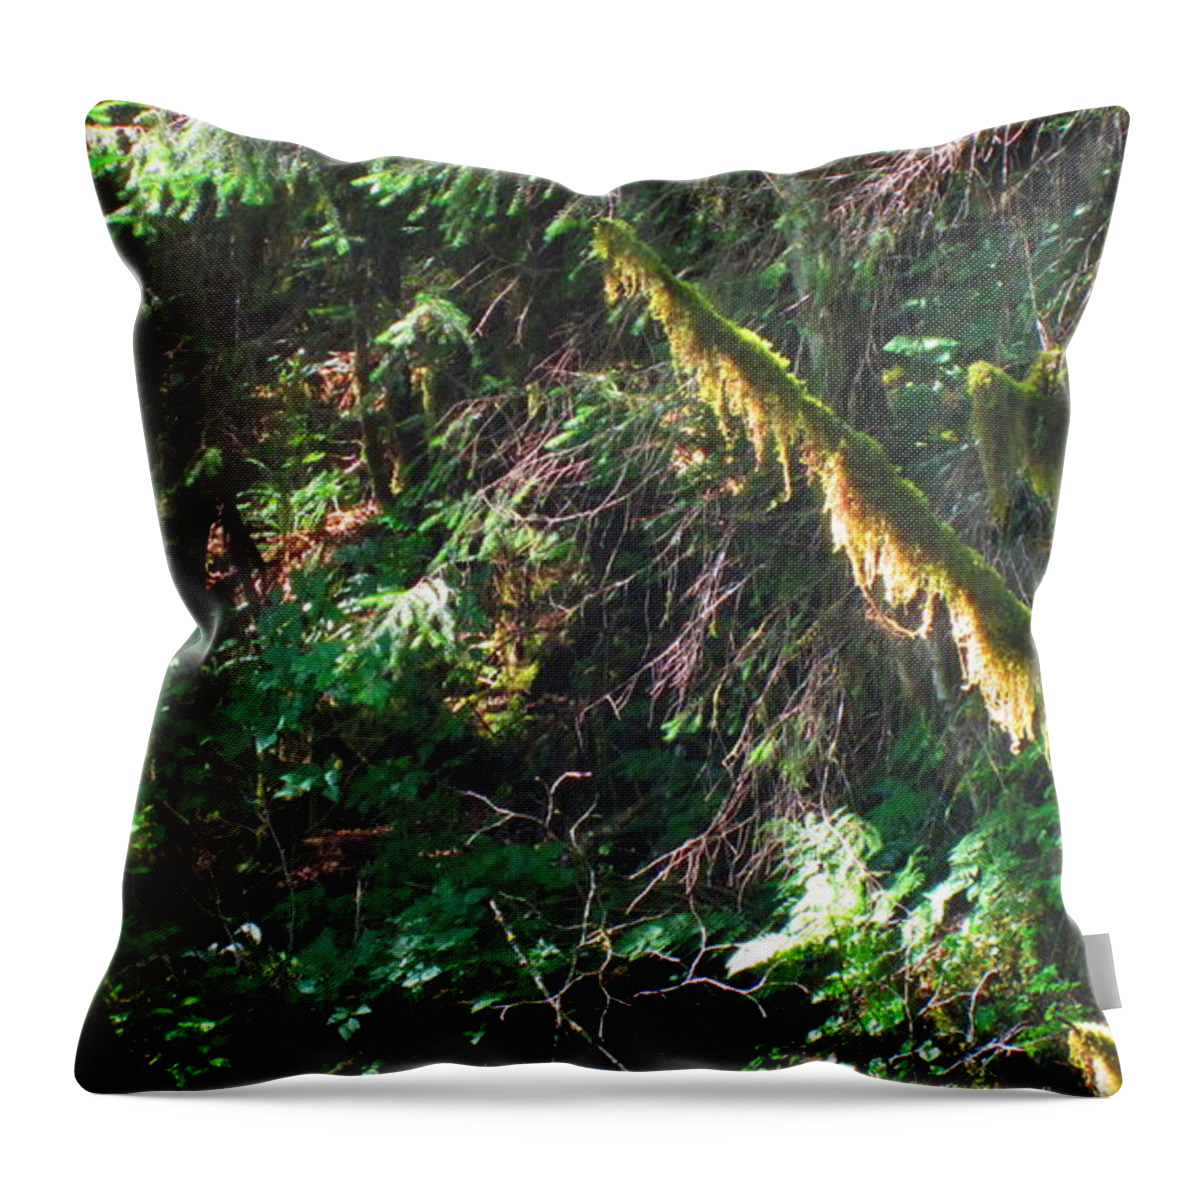 Ketchikan Throw Pillow featuring the photograph Ketchikan Green by Laurianna Taylor